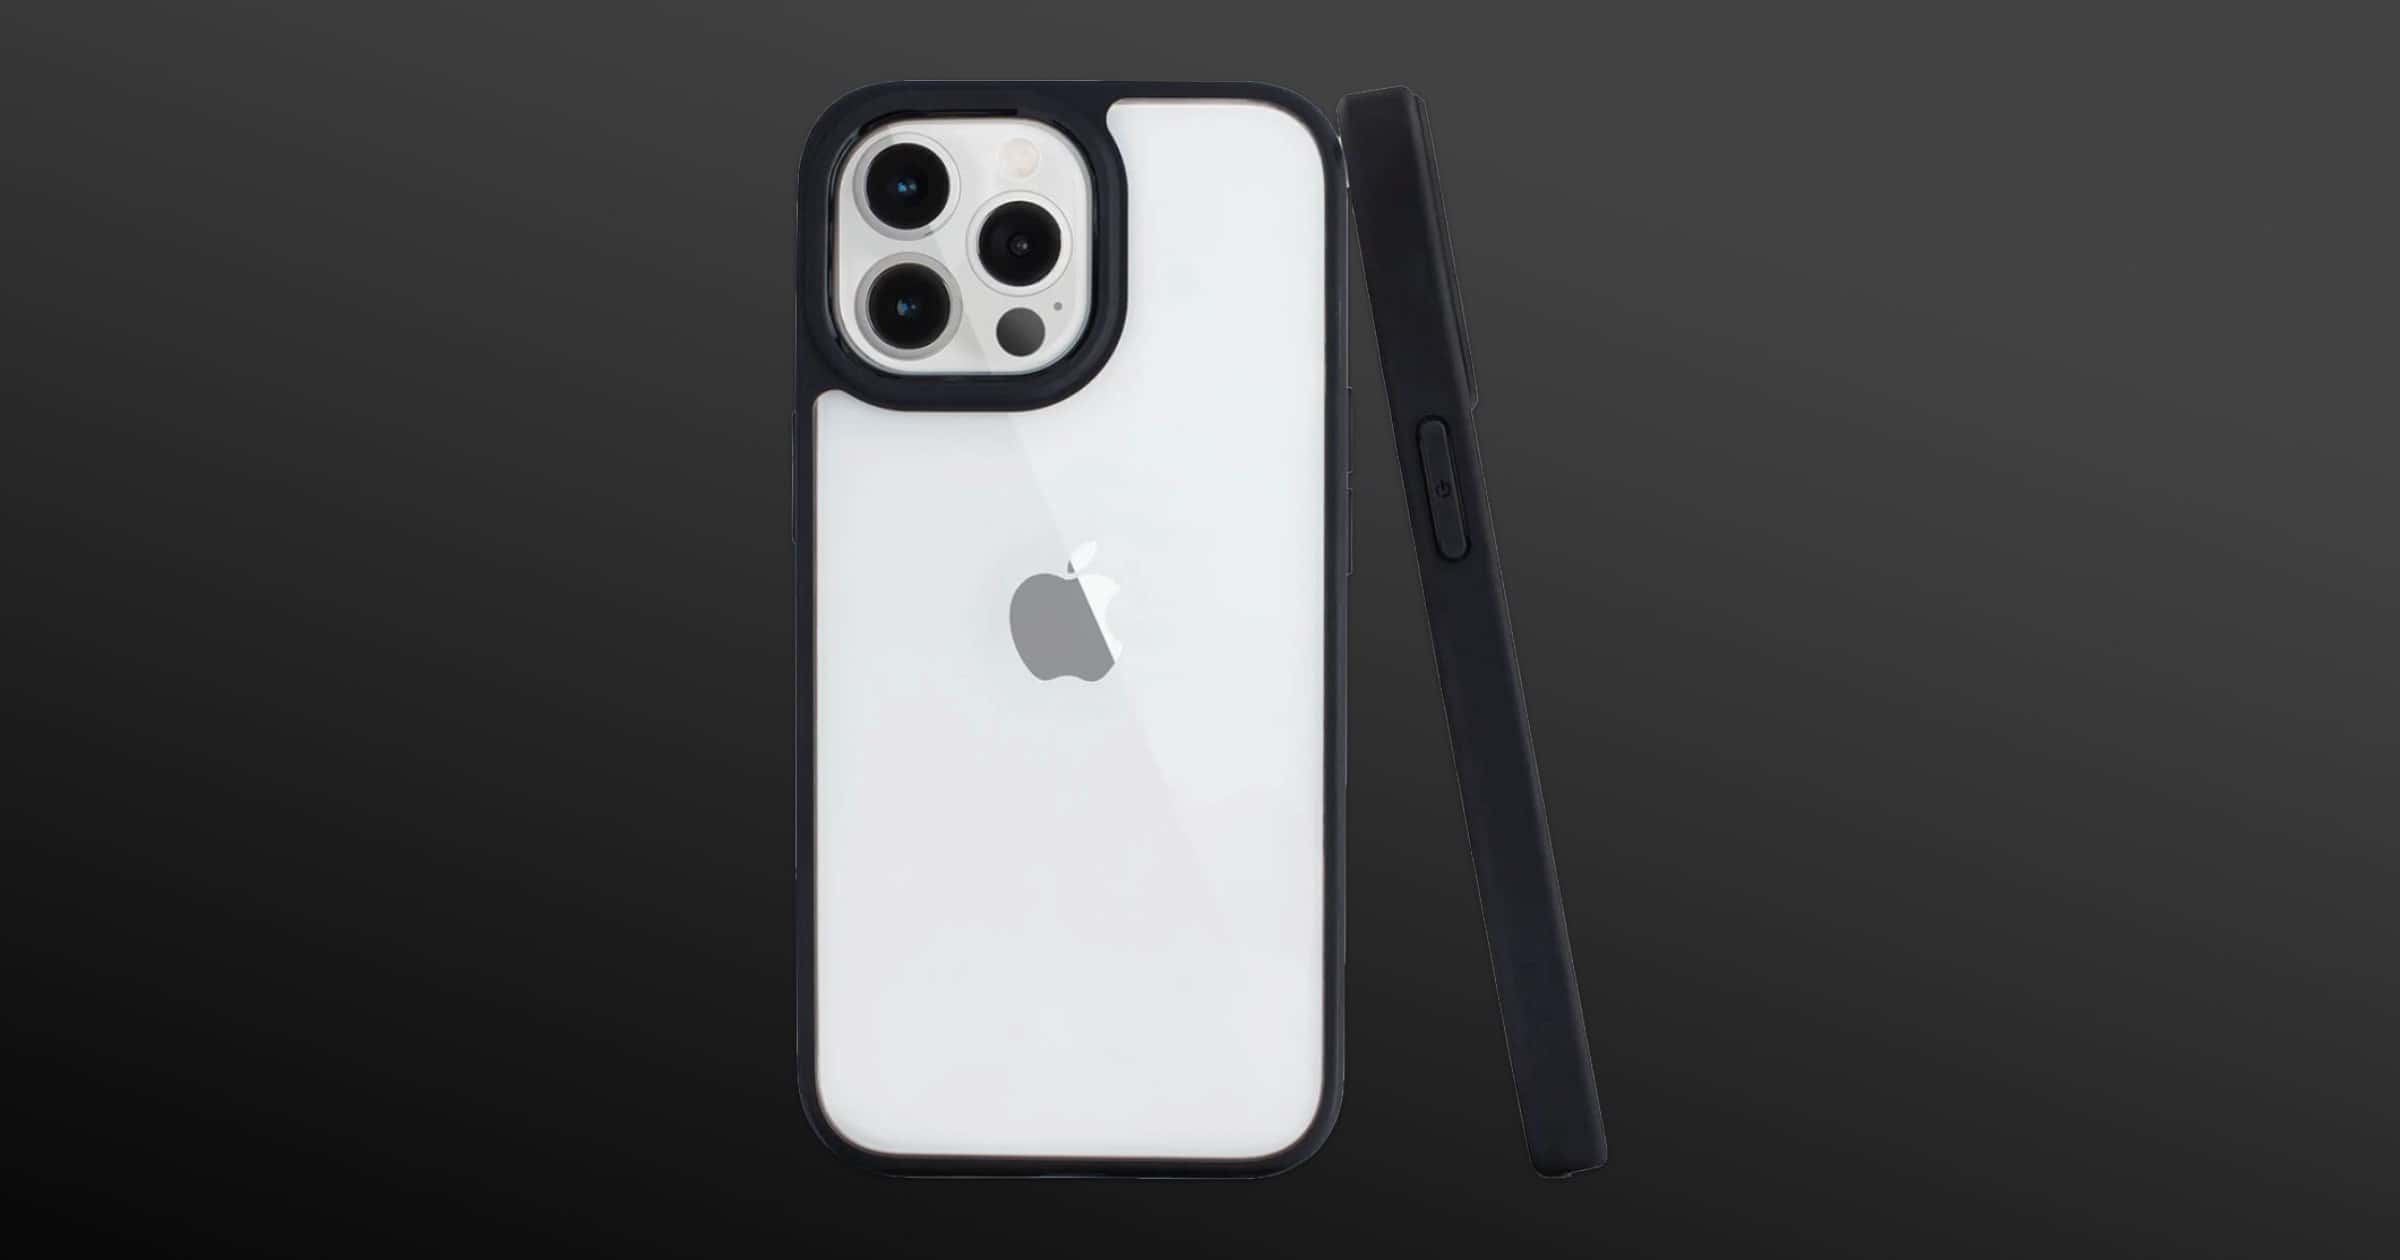 Totallee Releases a Protective ‘Hybrid’ Case for iPhone 13